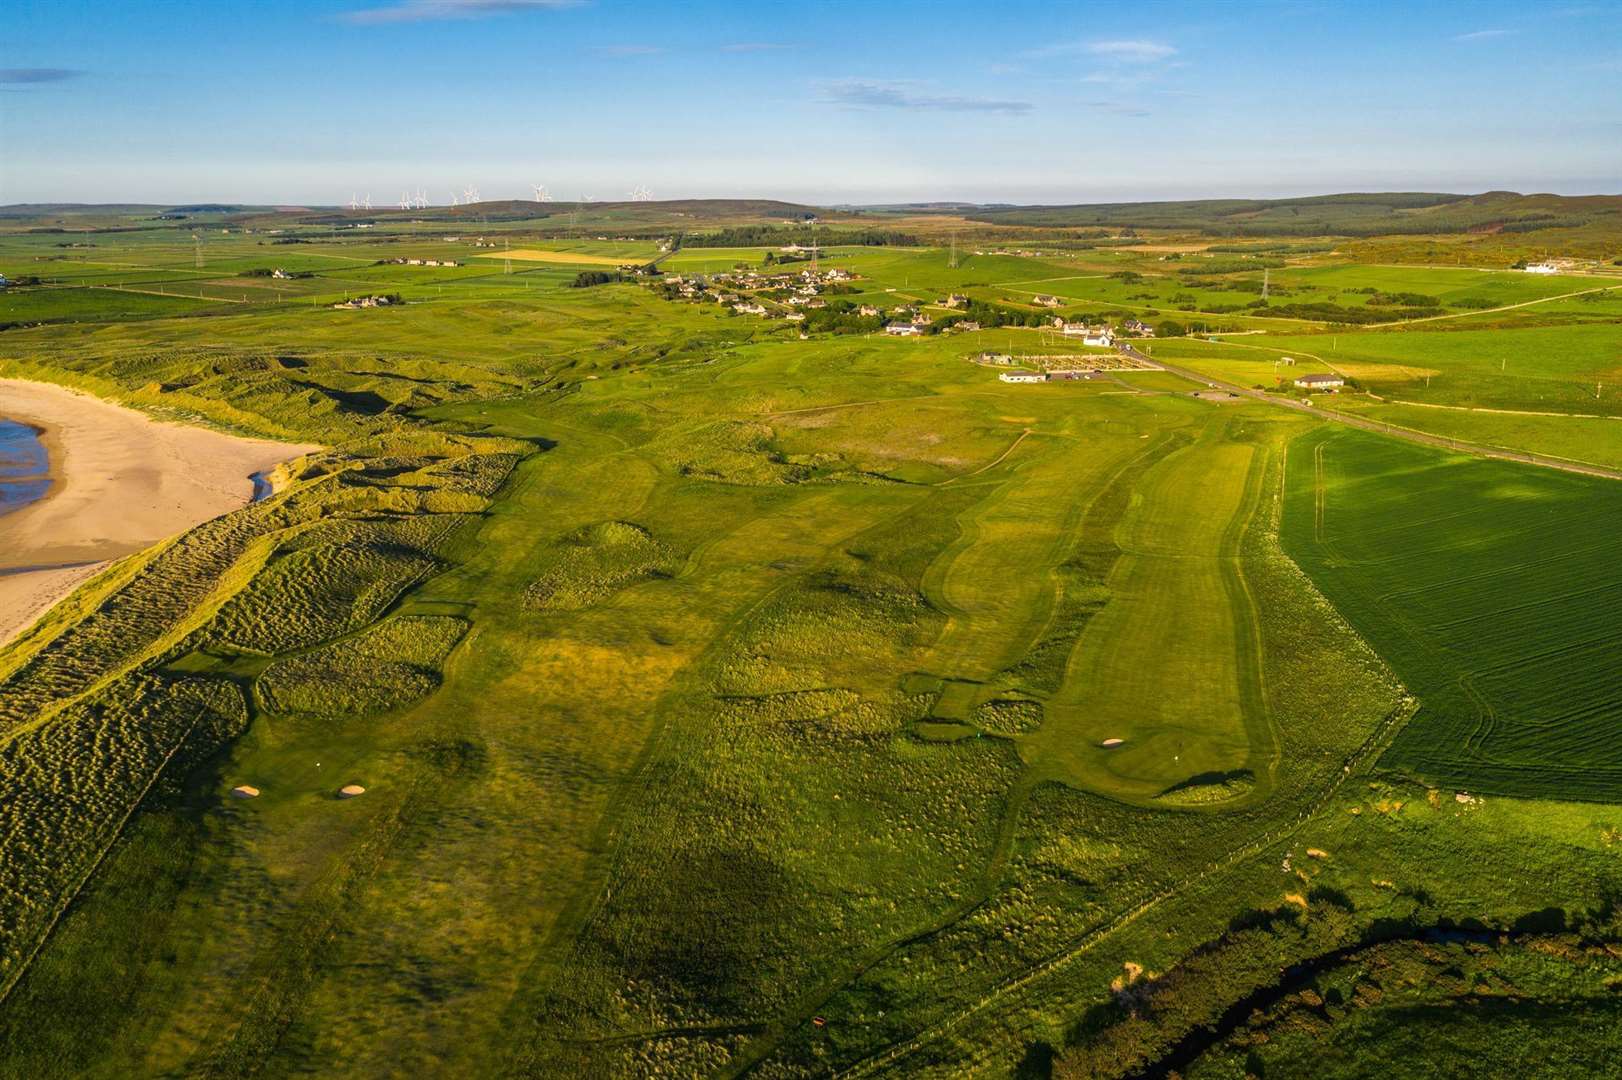 Supported by member Craig Macintosh, director of Highland Drones, Reay Golf Club initiated some aerial photography and filming of the course during the lockdown period. It is hoped the footage will showcase the course and Caithness in general. Picture: Craig Macintosh / Highland Drones